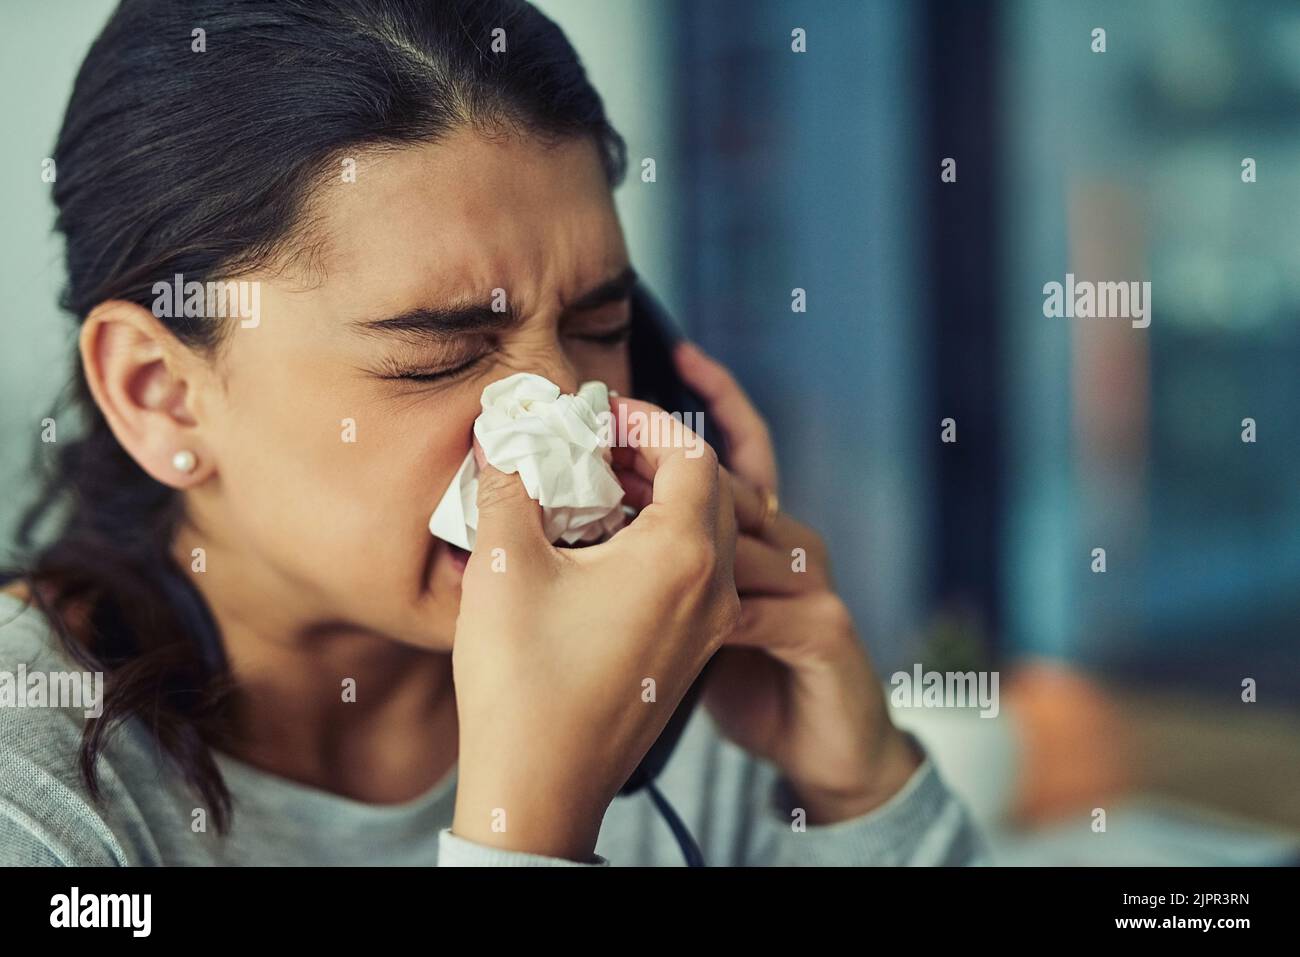 Suffering with uncontrollable sneezes. a young businesswoman blowing her nose while speaking on a phone in an office. Stock Photo